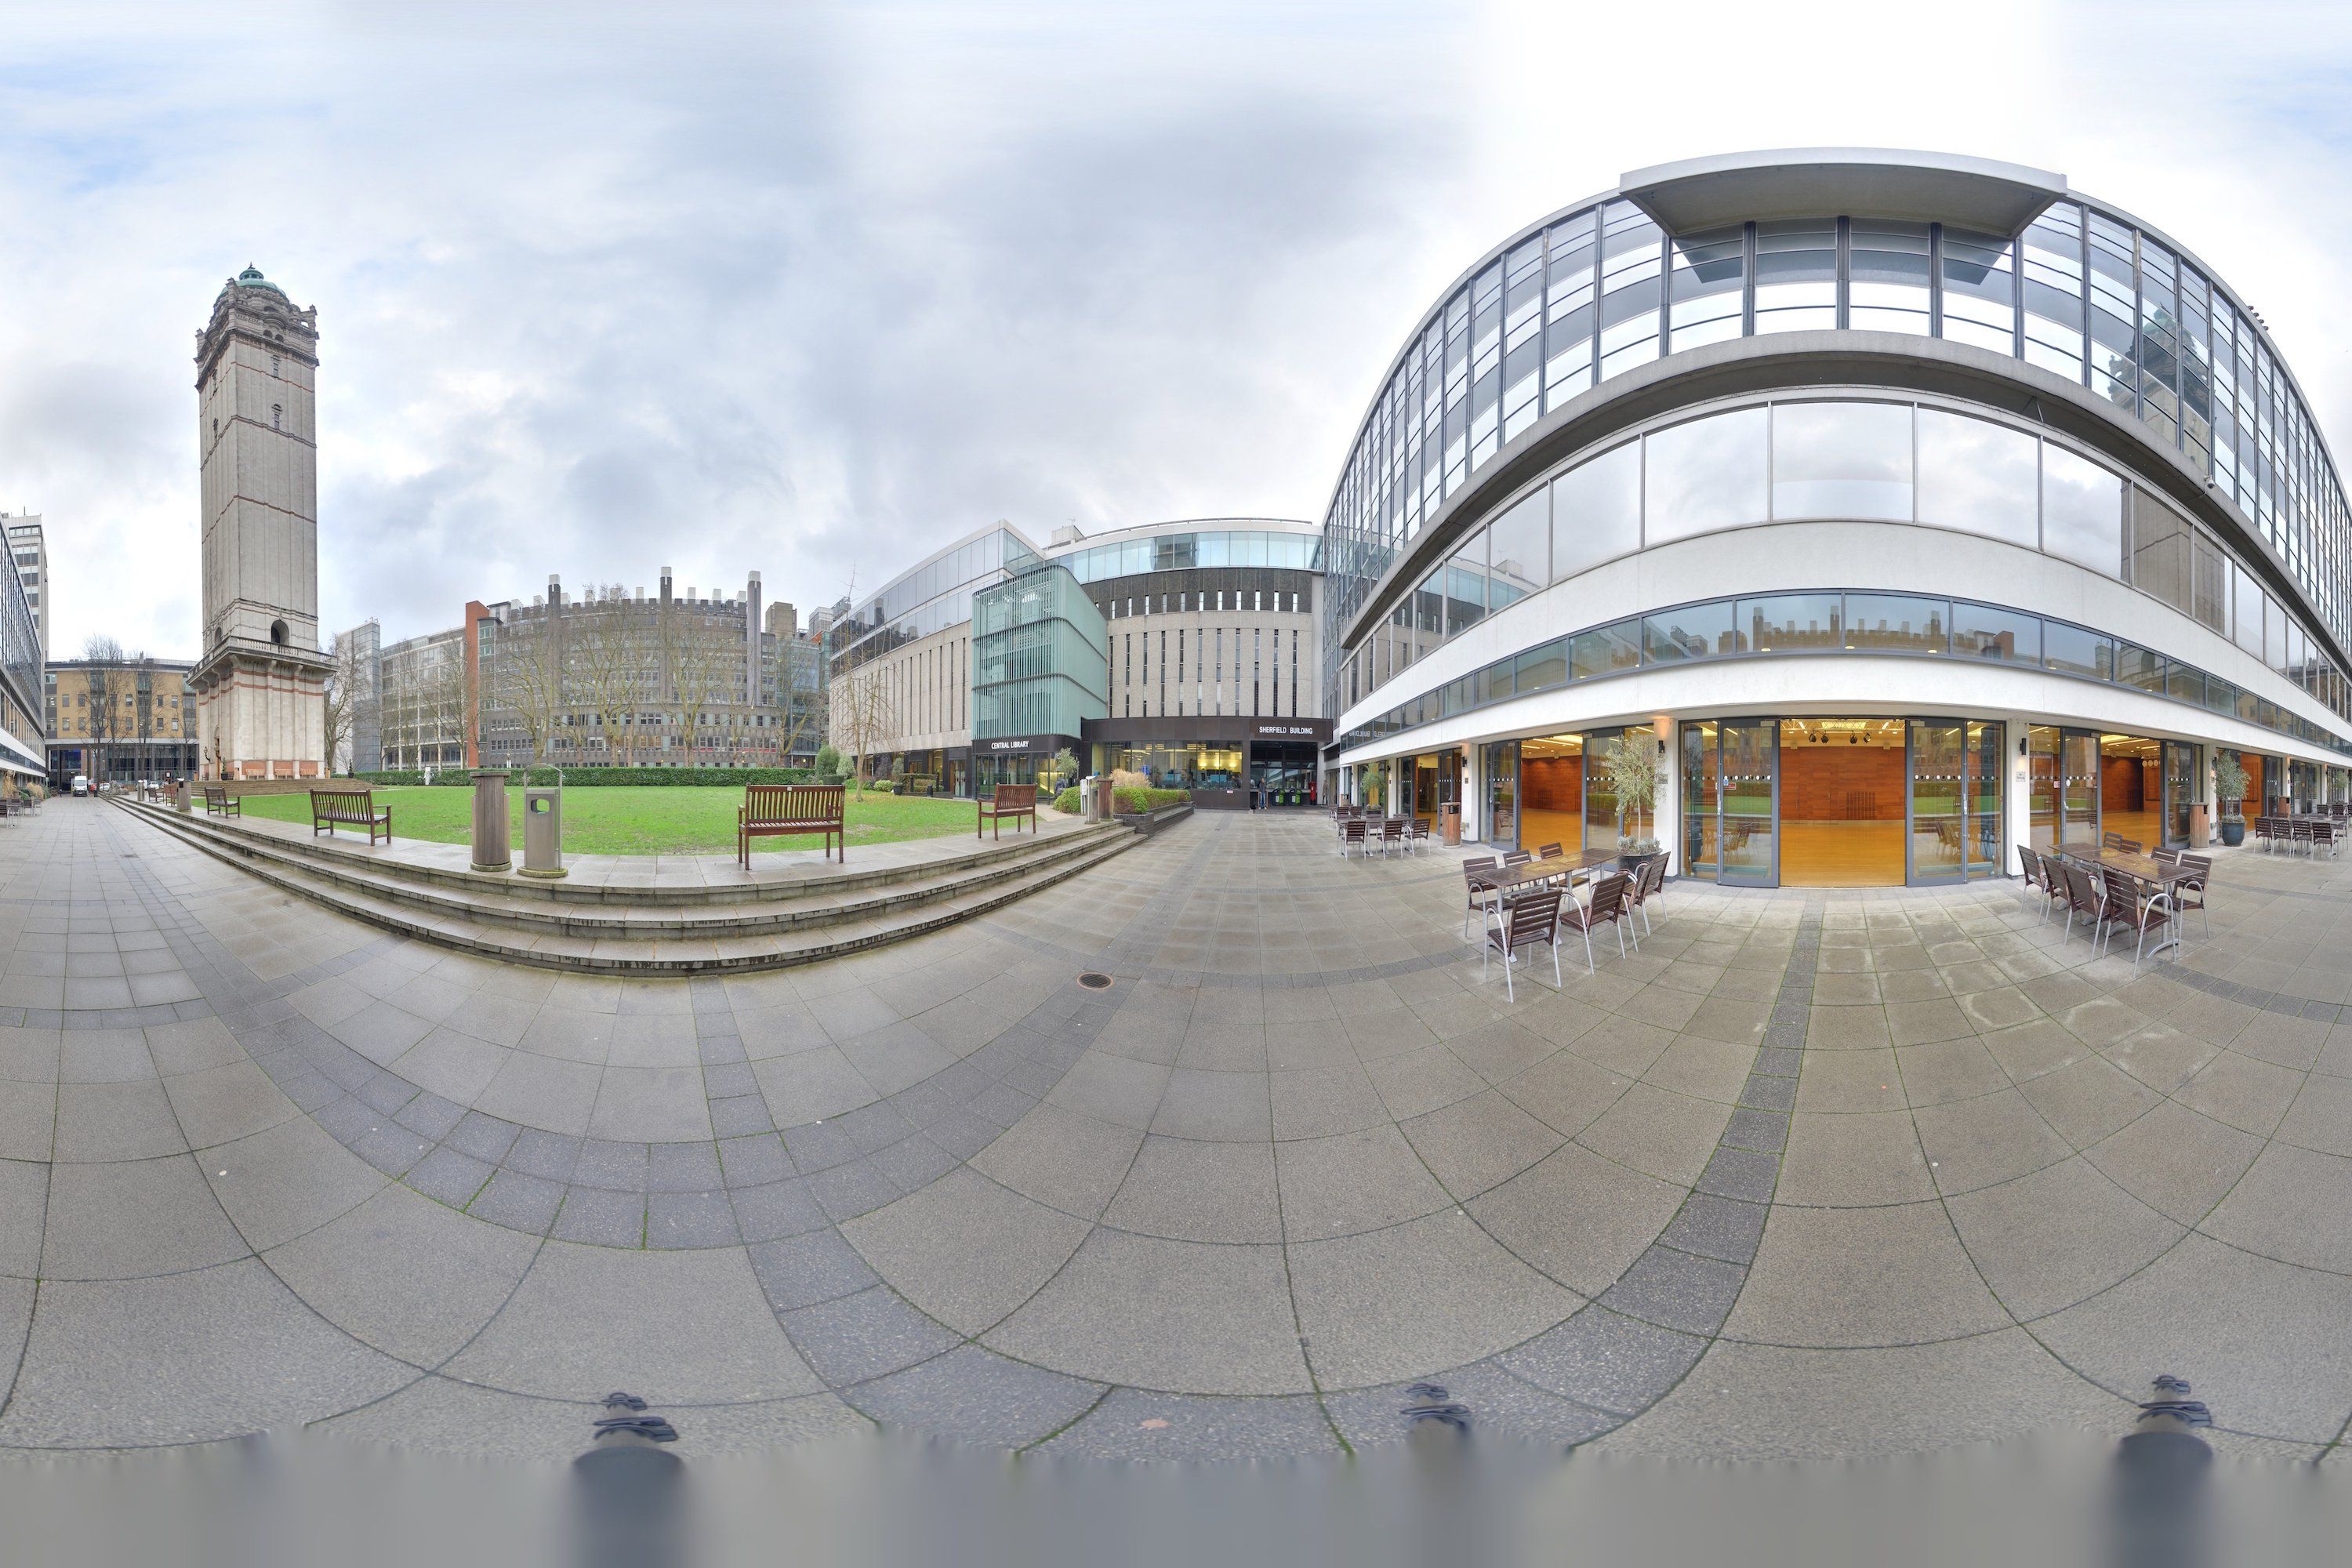 A panaromic view of the Queen's Lawn from the Sherfield Building